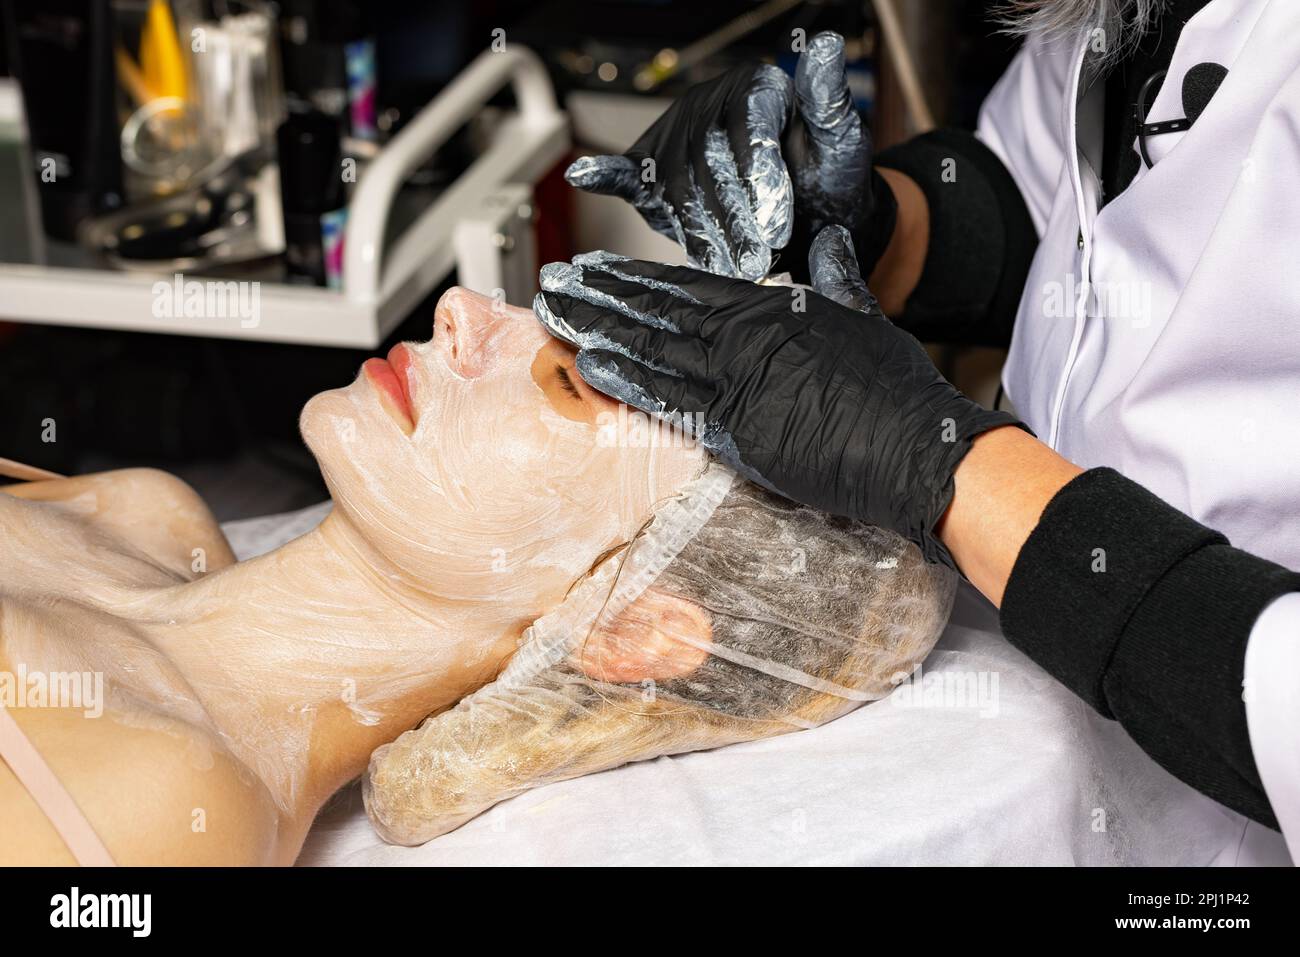 Professional beautician conducts hands in black latex gloves the procedure of cleaning the face of a young woman in a spa salon. Stock Photo